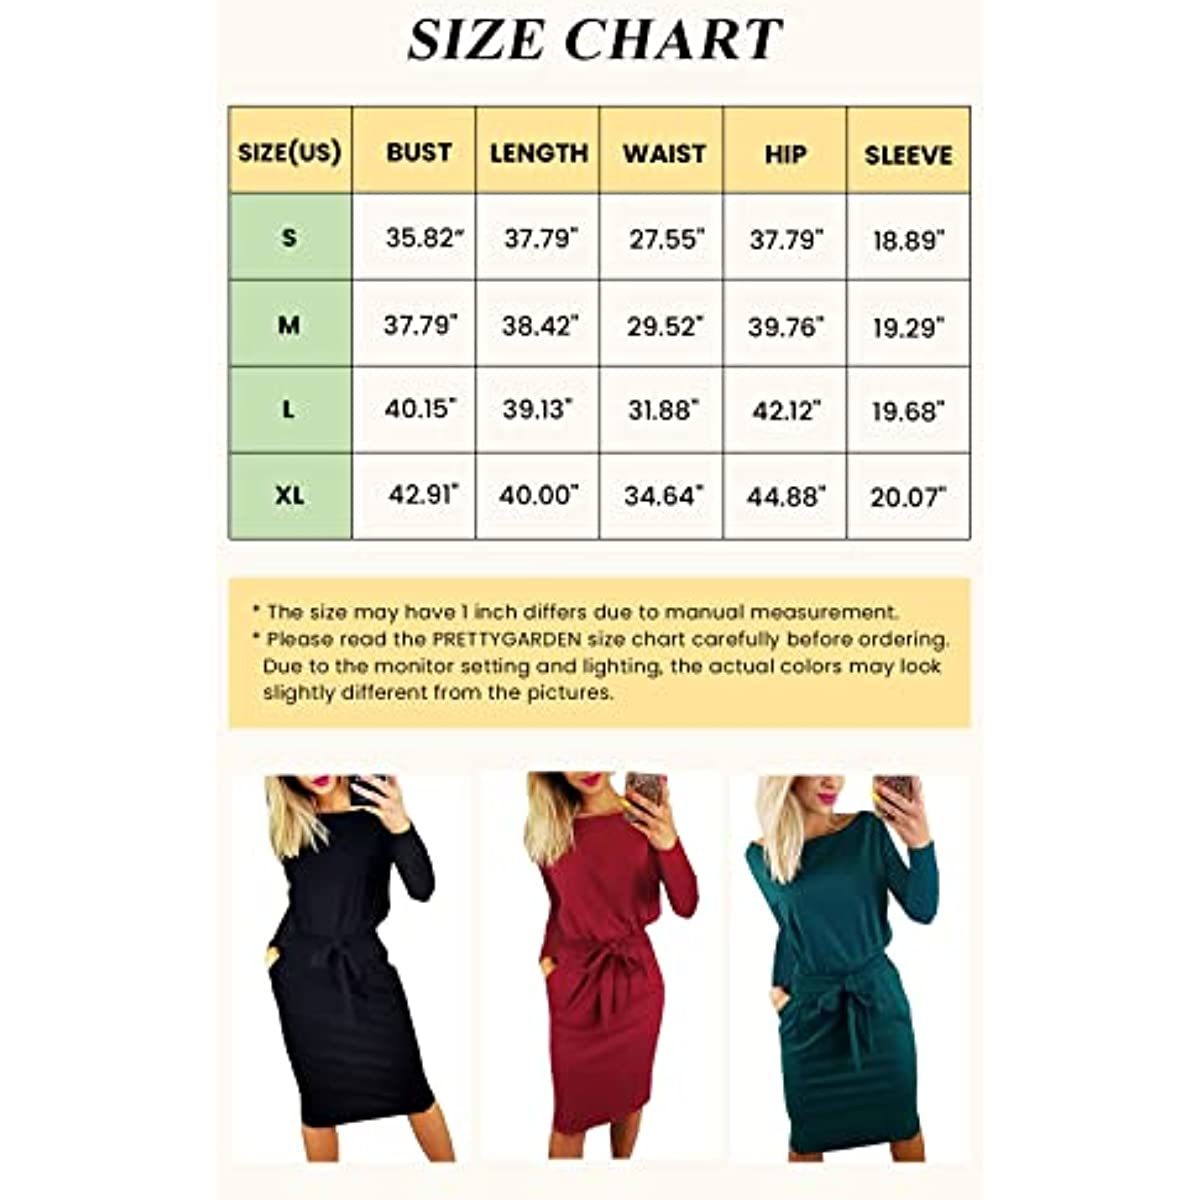 2023 Fashion Fall Dresses for Women Casual Long Sleeve Belted Party Bodycon Sheath Pencil Dress